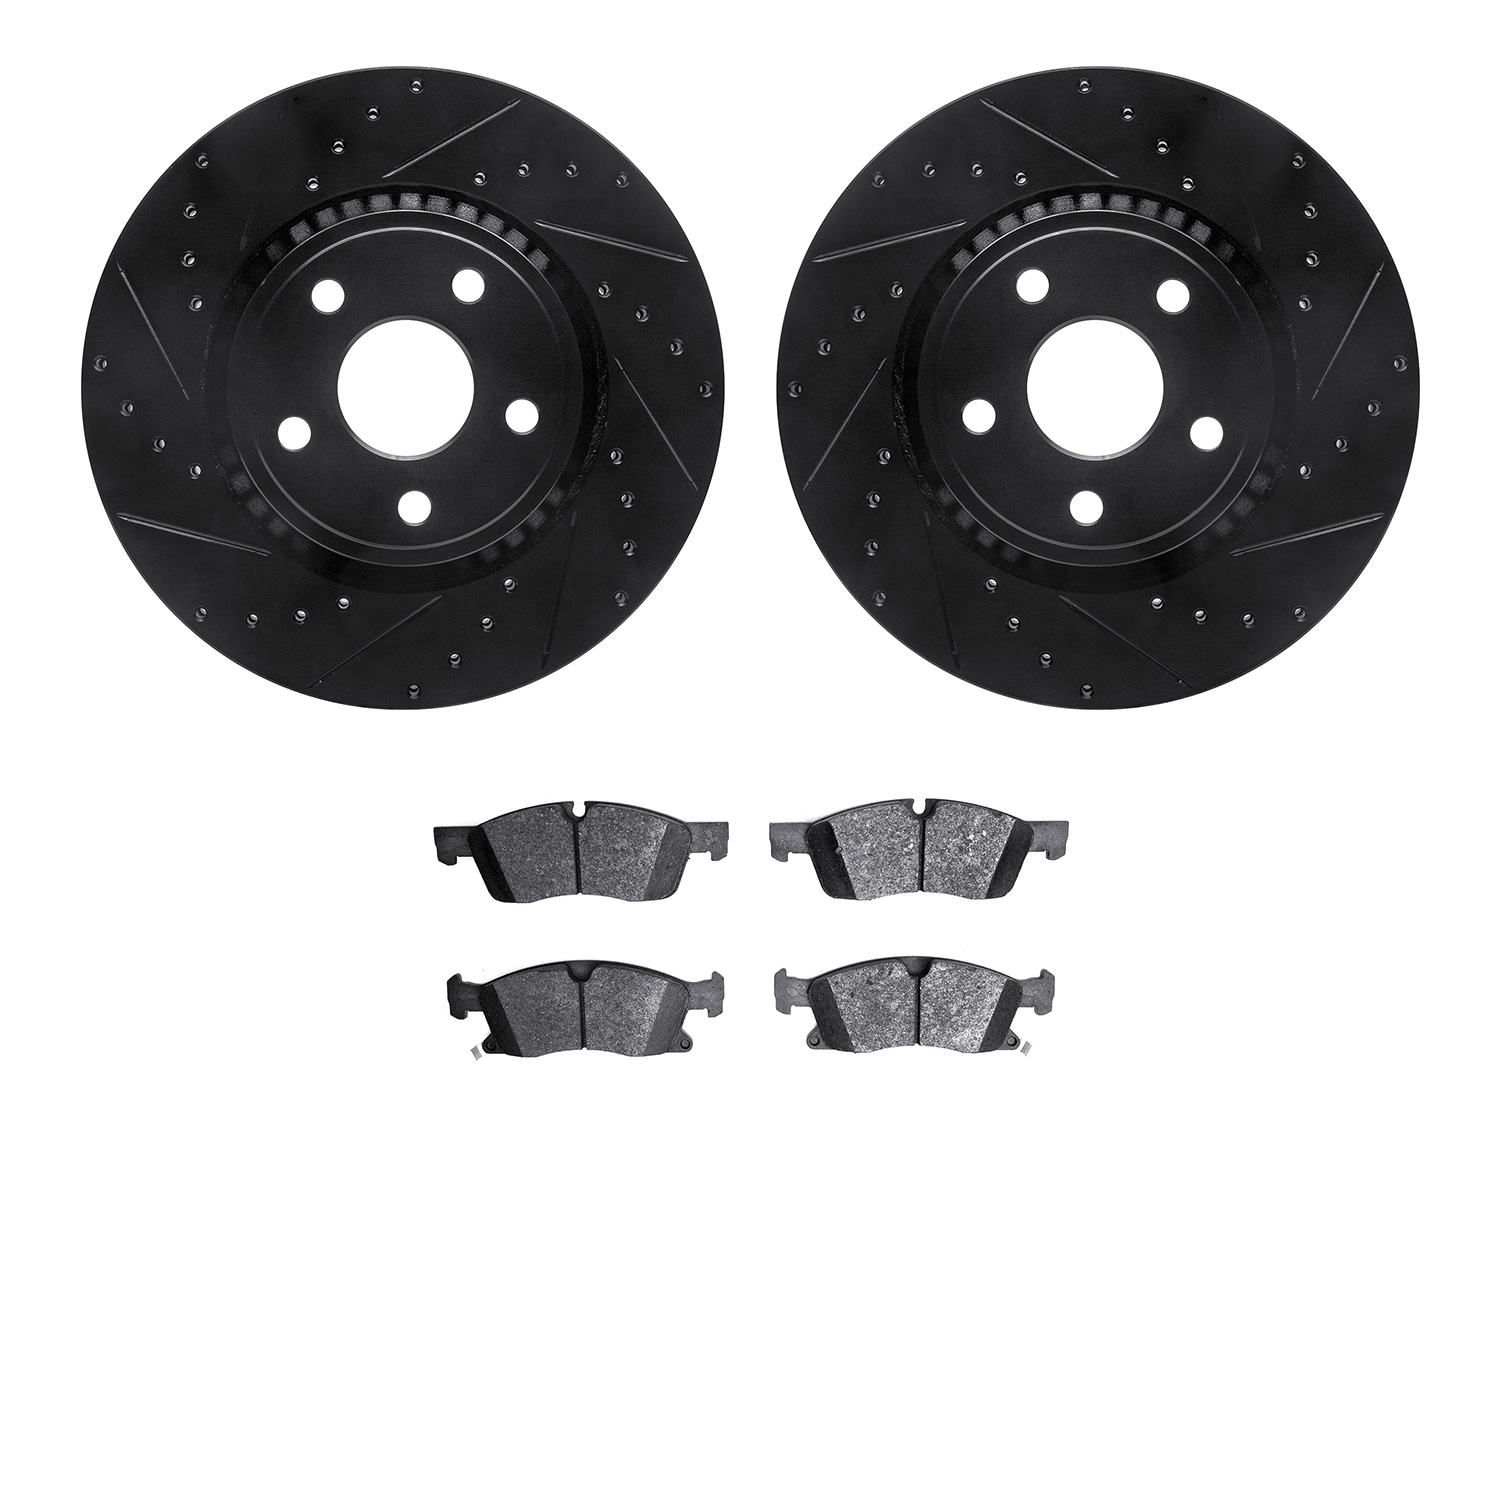 8402-42008 Drilled/Slotted Brake Rotors with Ultimate-Duty Brake Pads Kit [Black], Fits Select Mopar, Position: Front